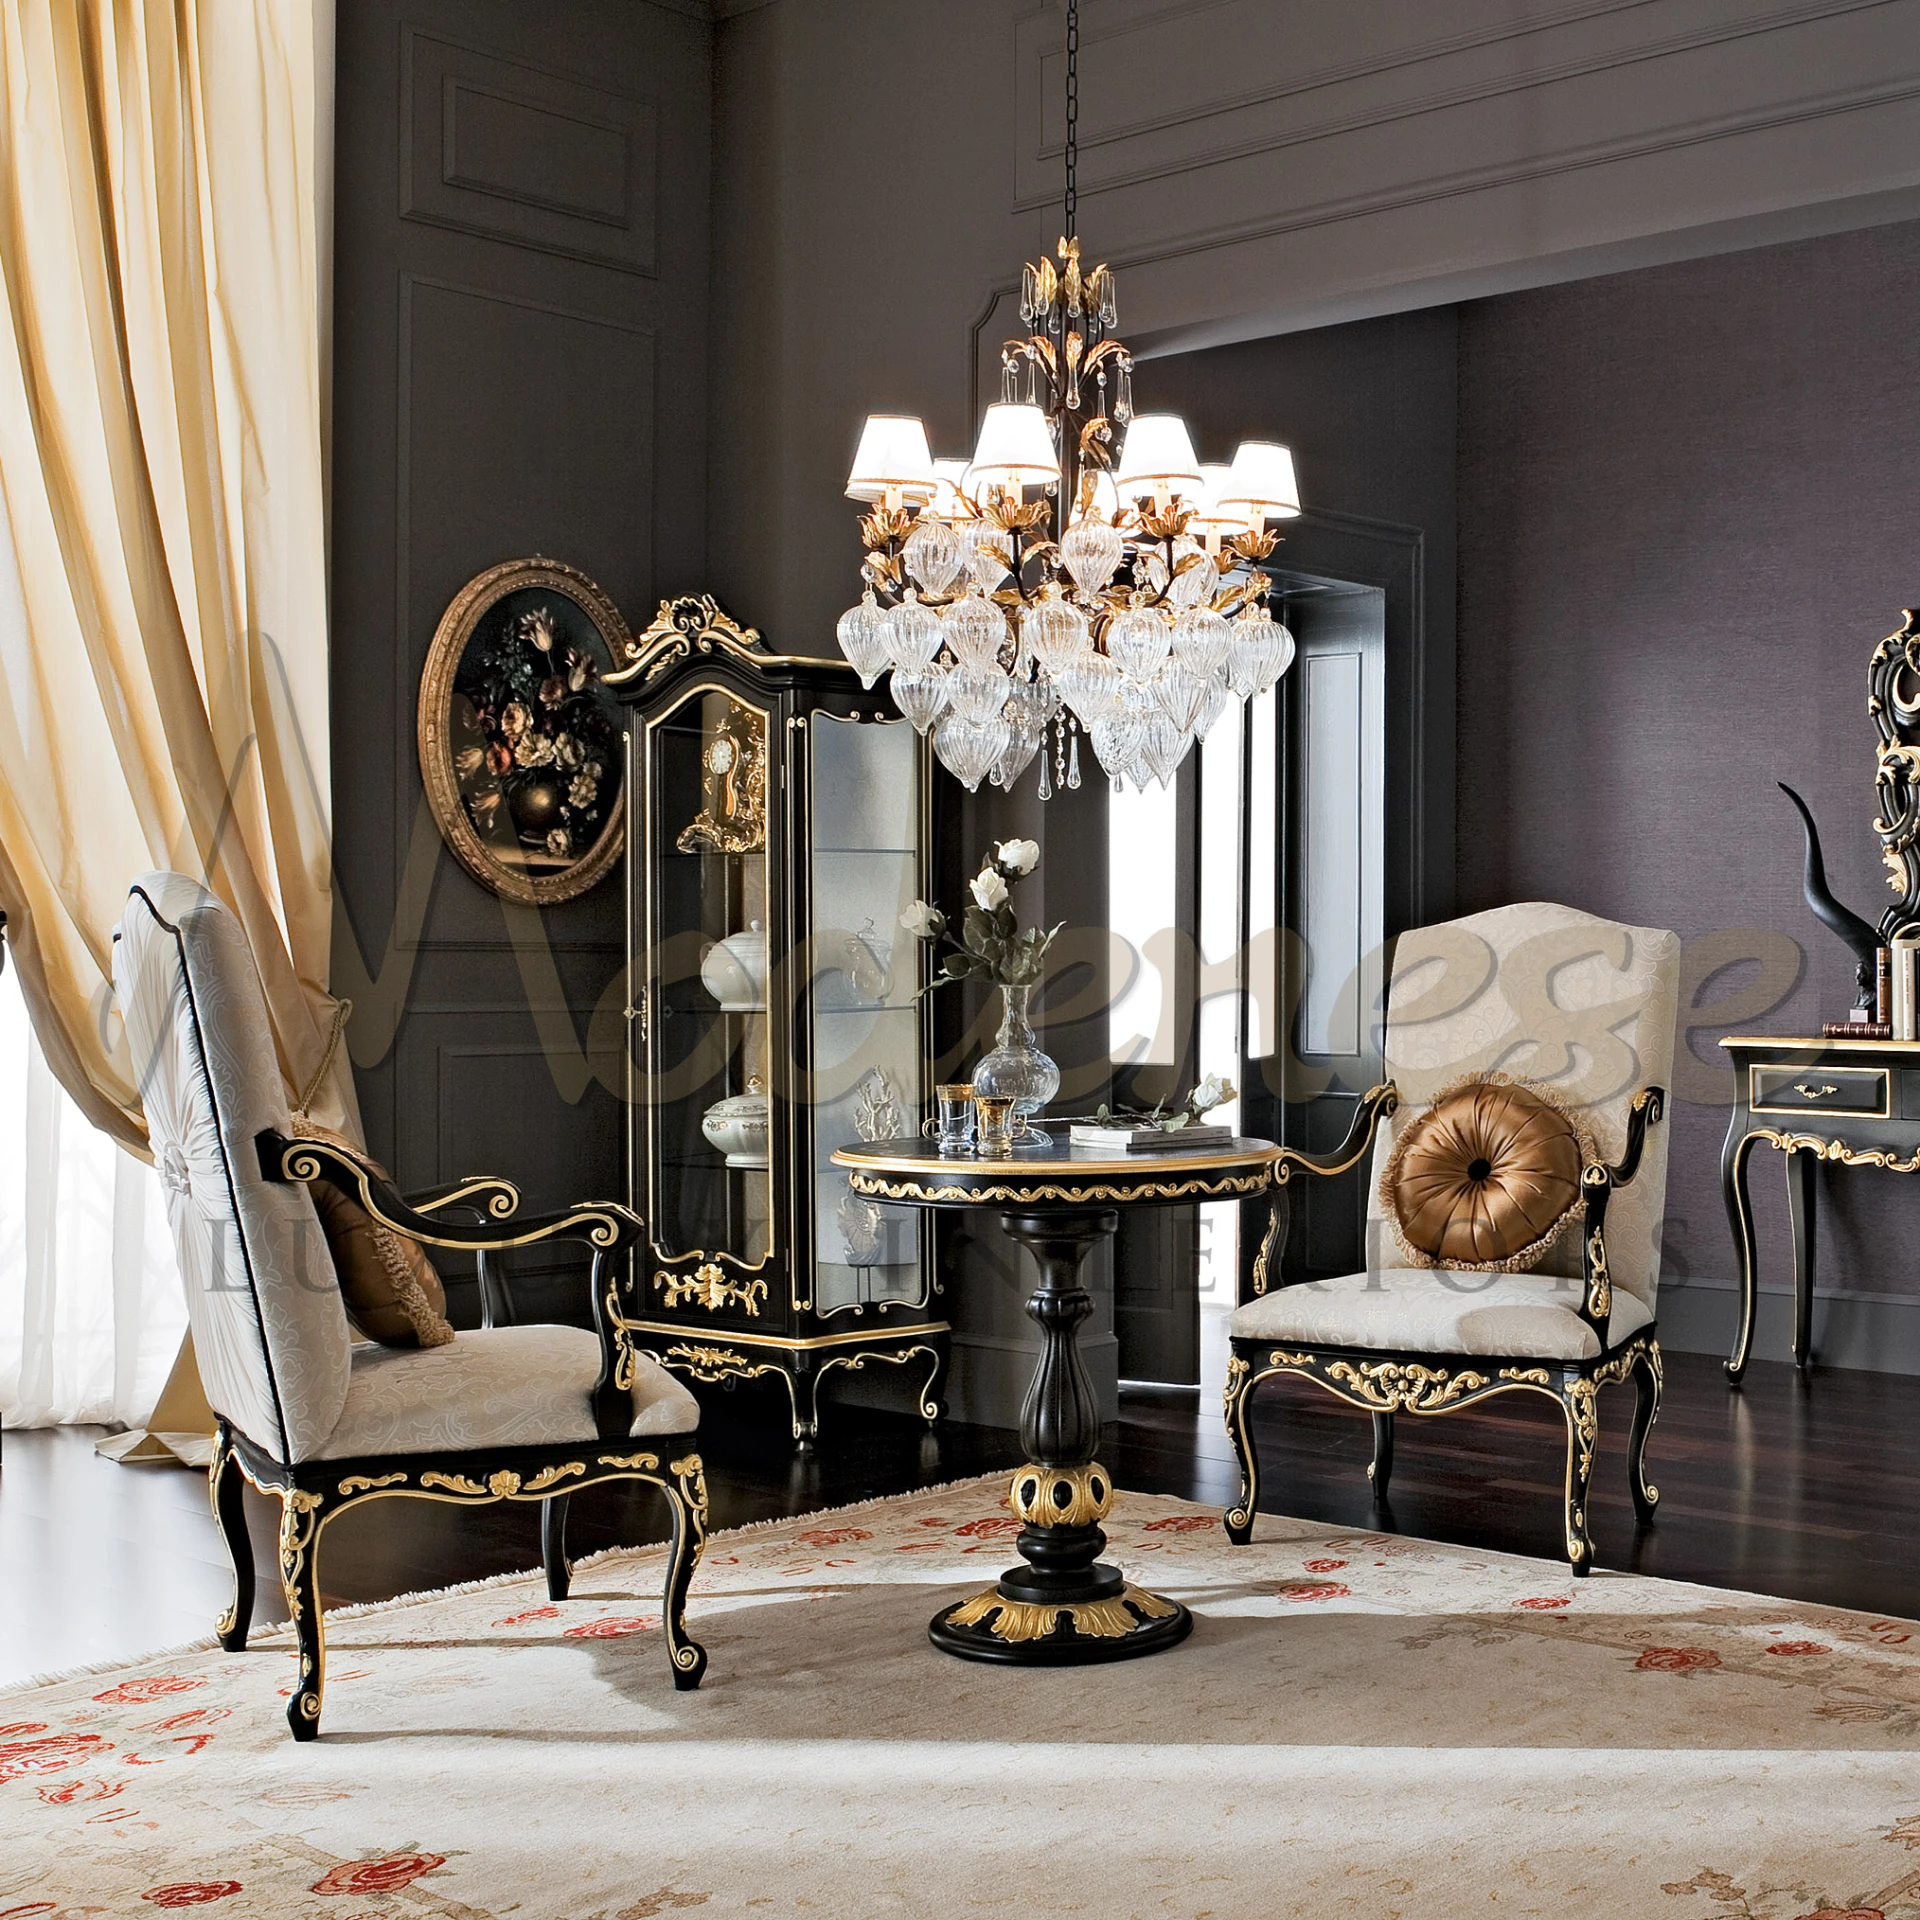 Bespoke Rococo Armchair: Timeless Beauty with Customized Comfort